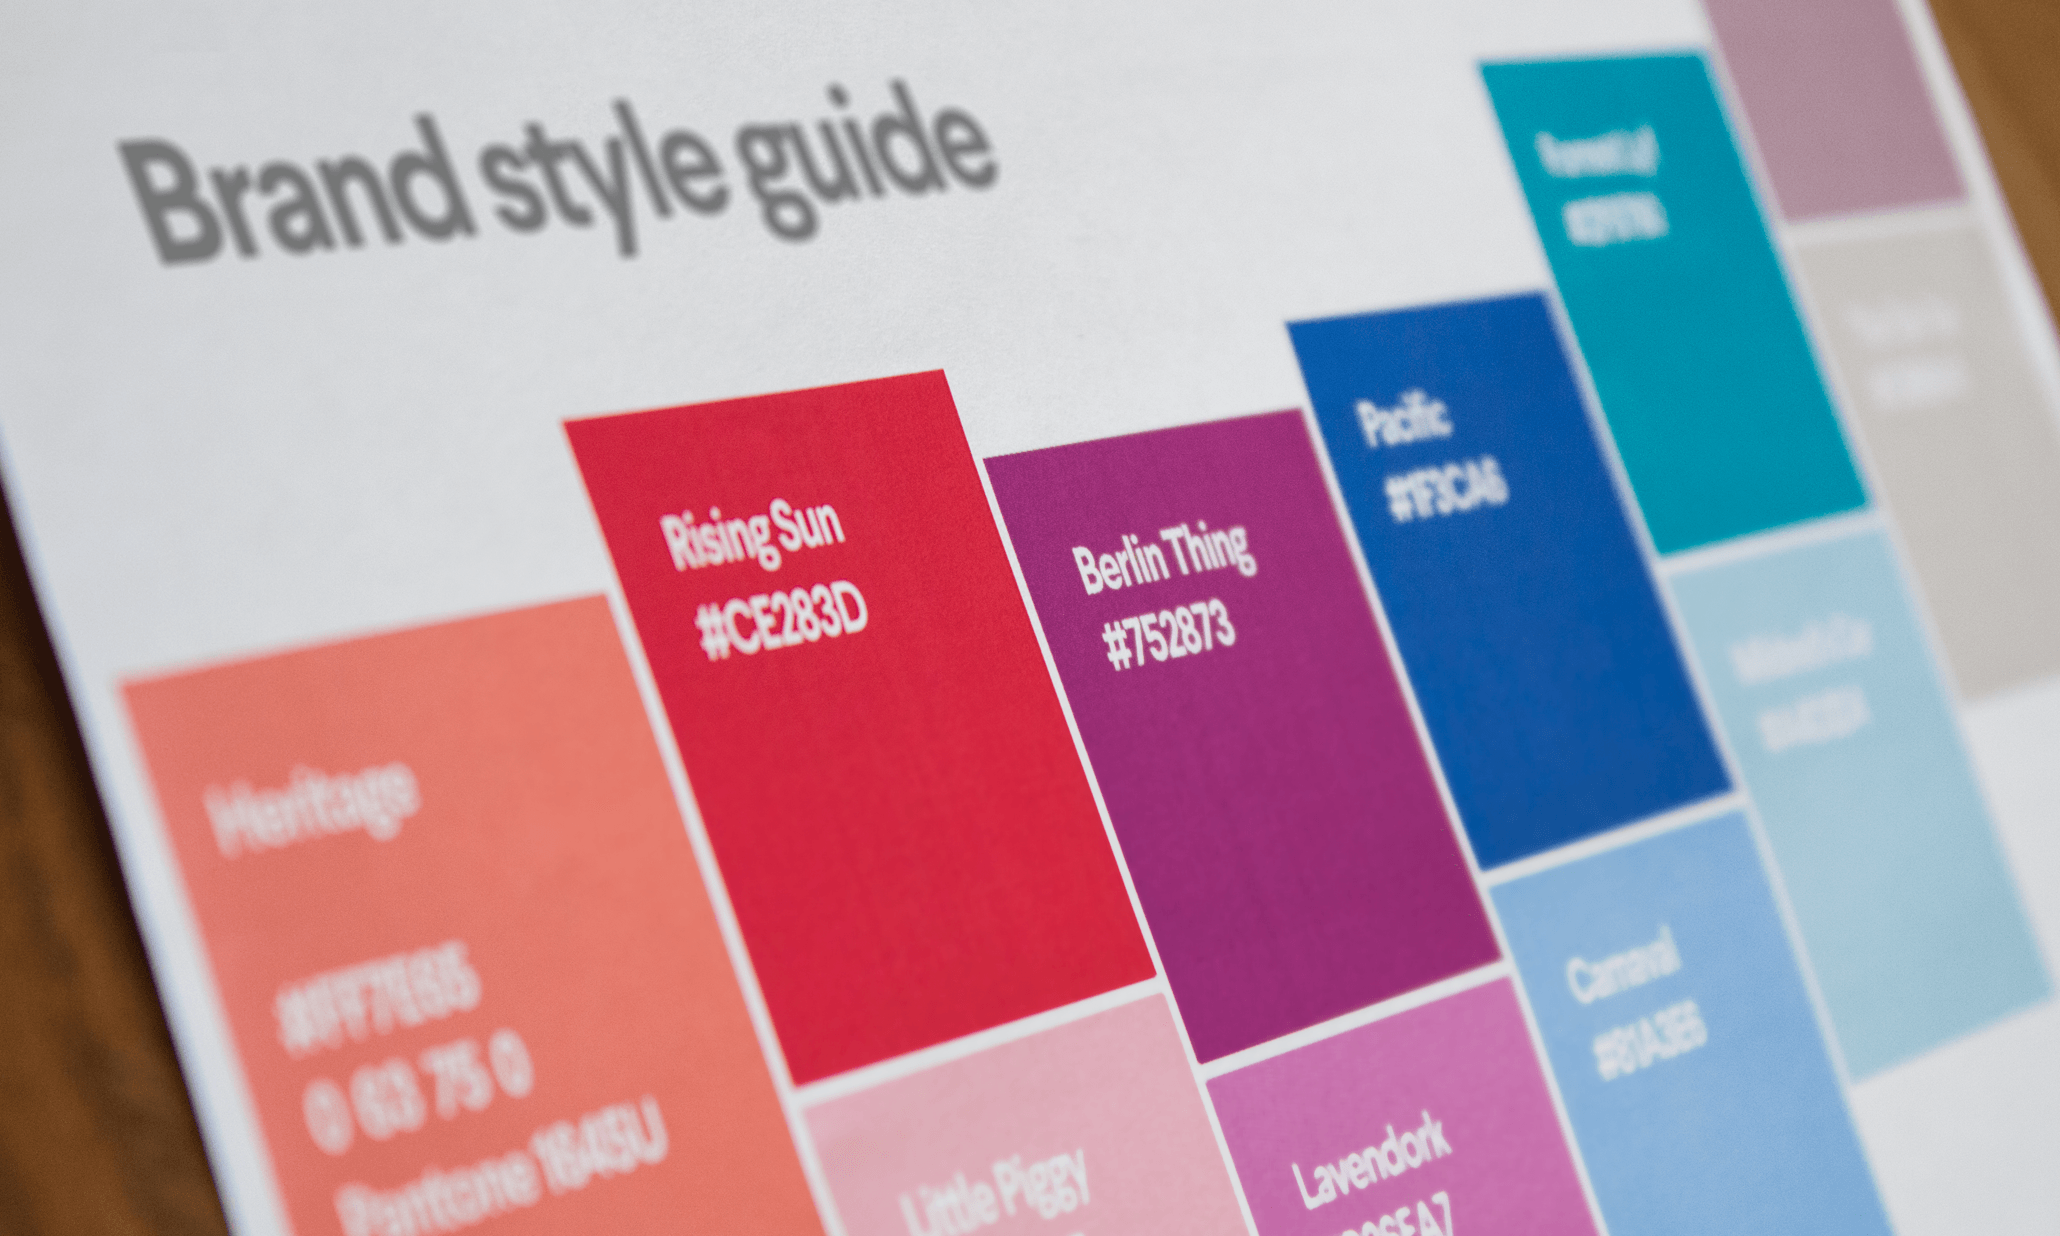 How to brand guide - 99designs